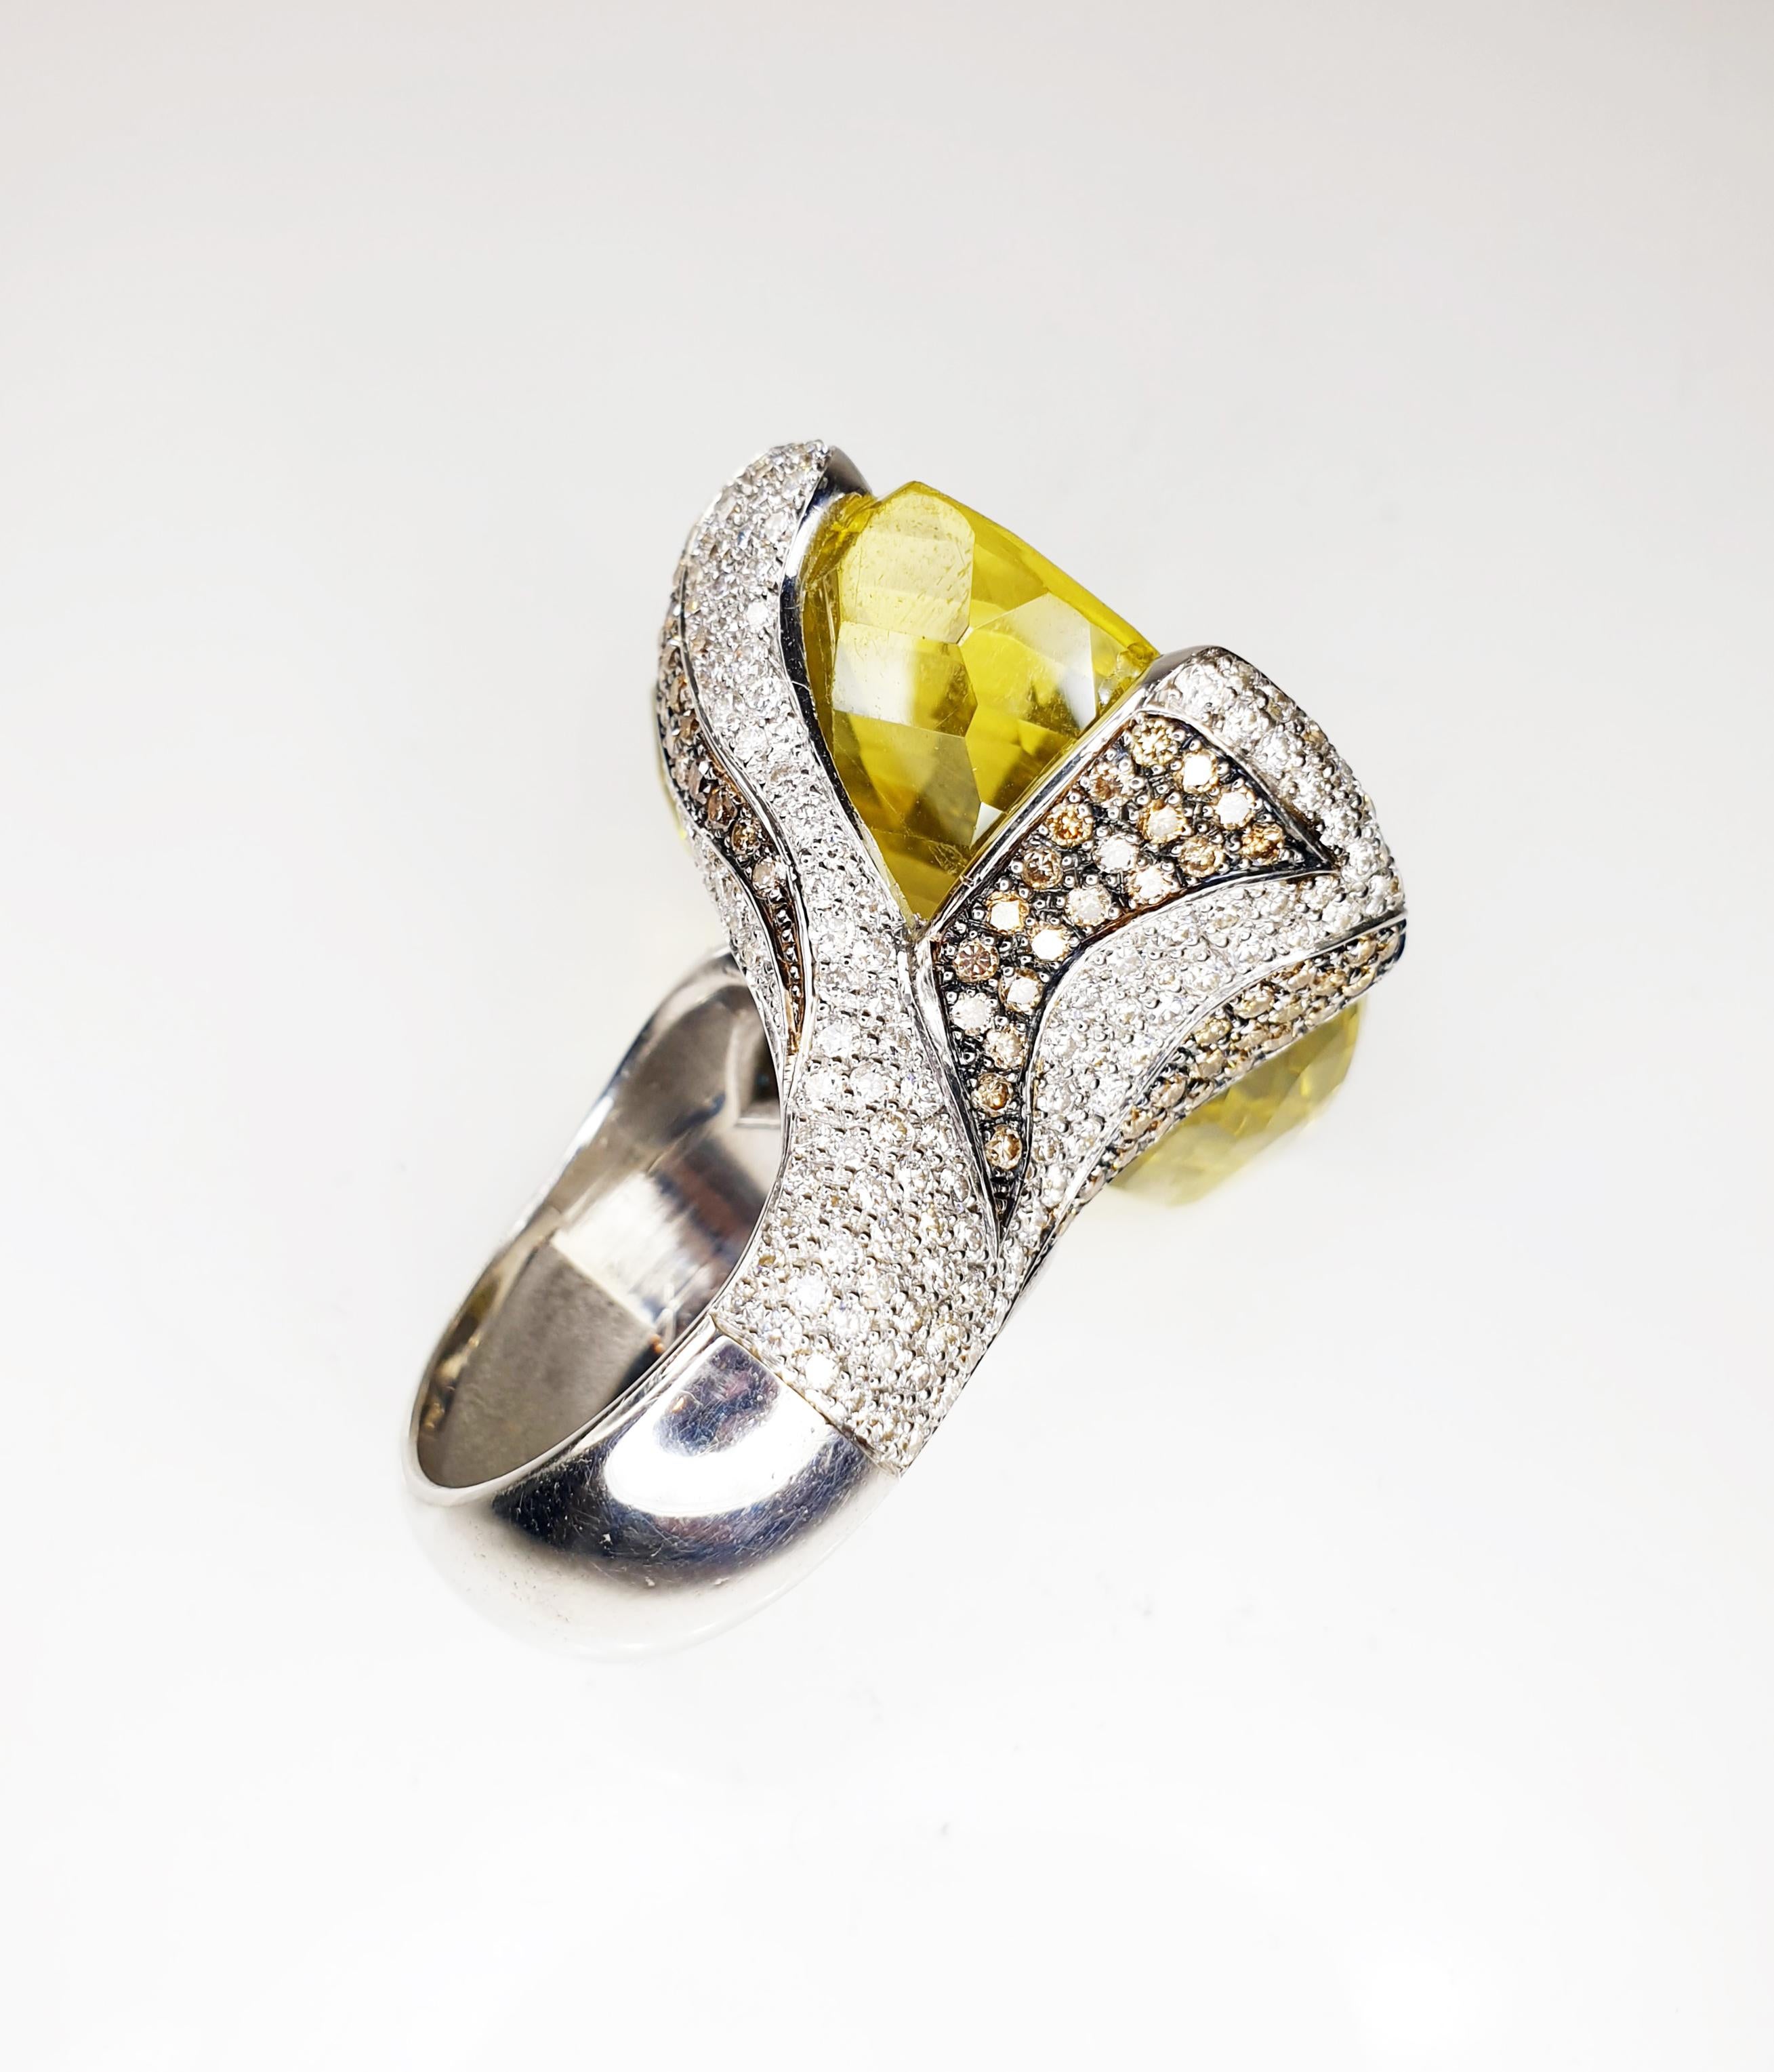 Contemporary Multifaceted 51 Carat Citrine Quartz with Diamonds and 18 Karat White Gold Ring For Sale